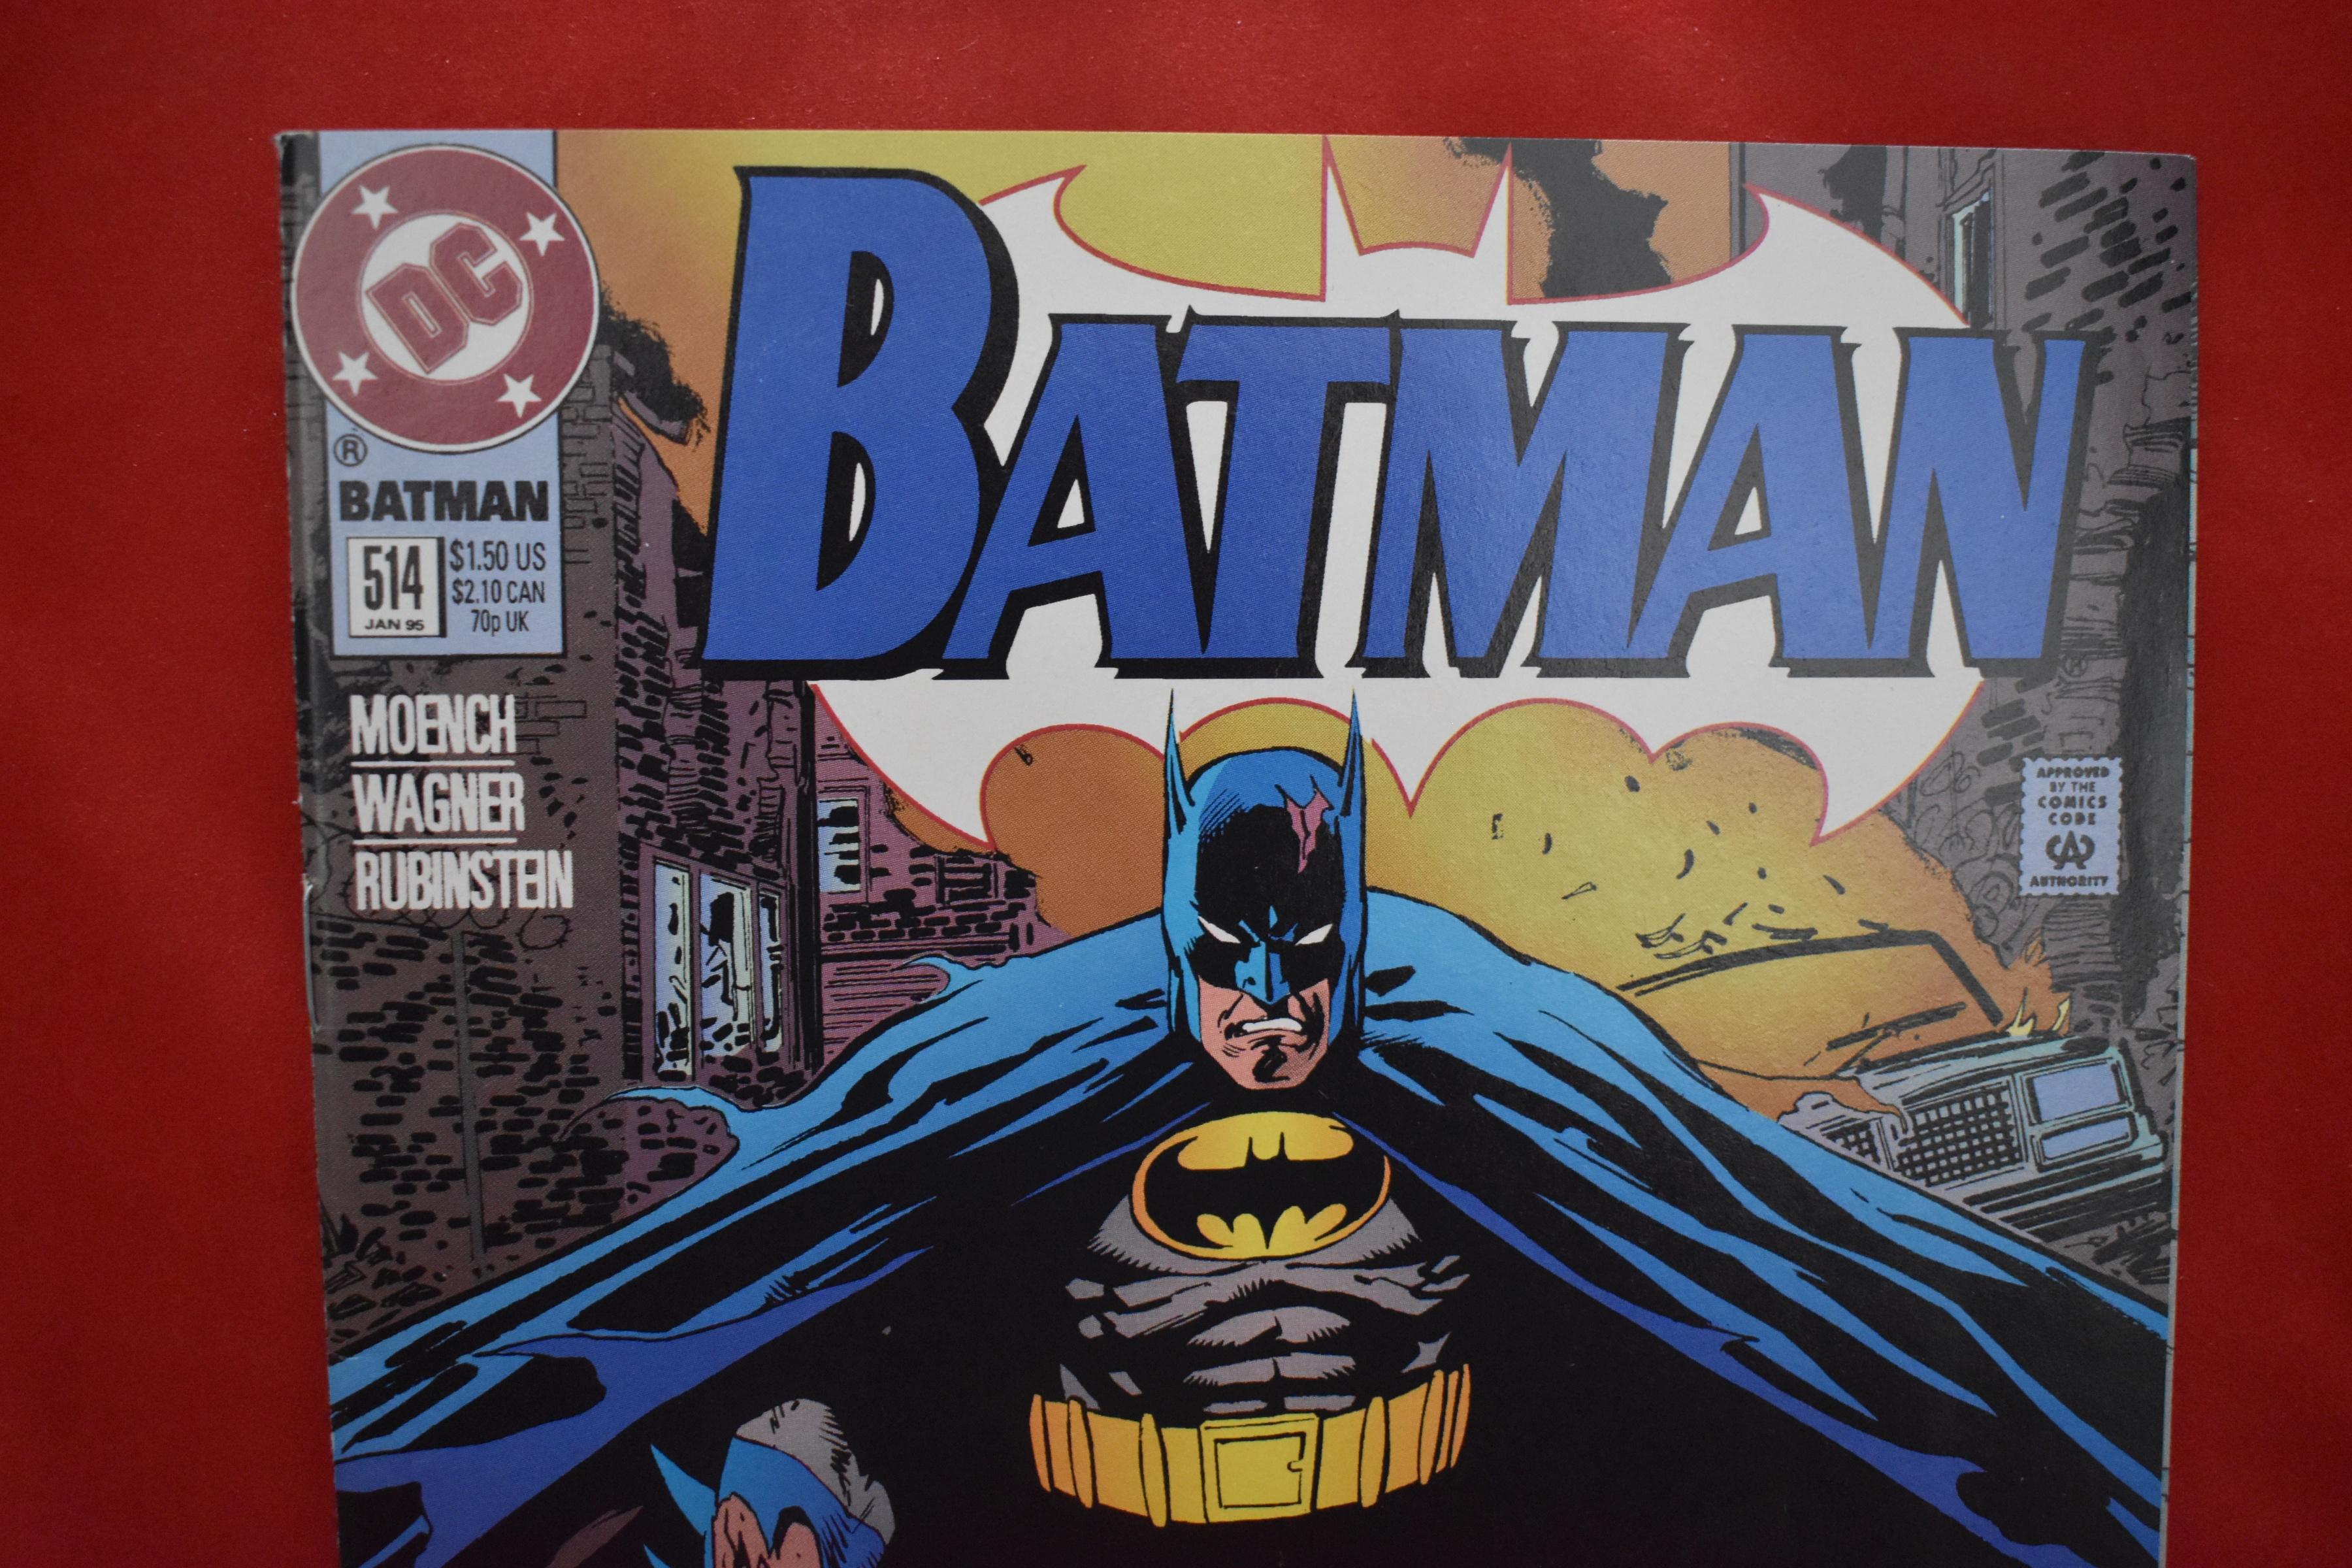 BATMAN #514 | ONE NIGHT IN THE WAR ZONE! | RON BAGNER COVER ART